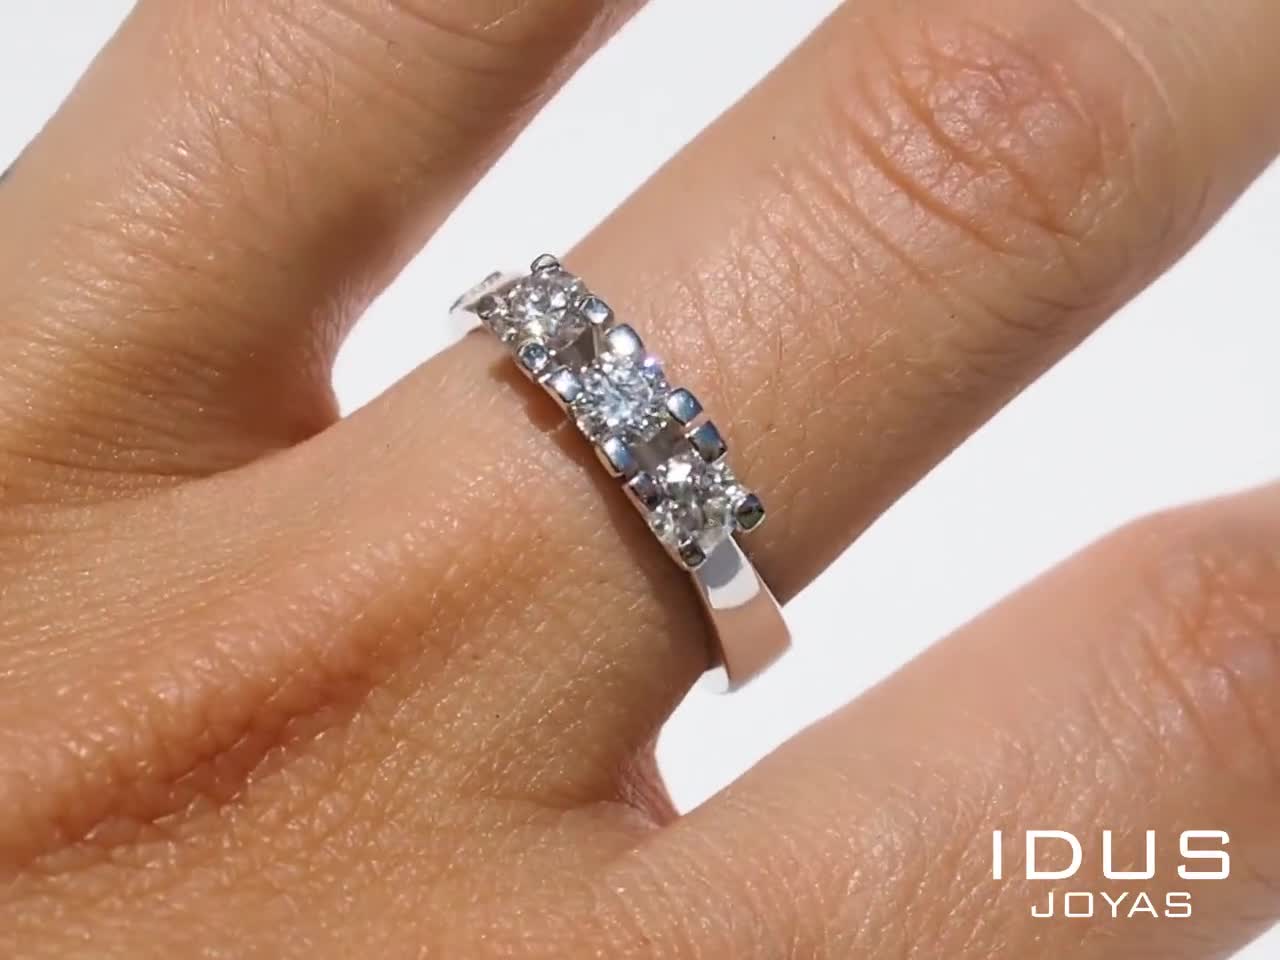 Inverted (Upside Down) Diamond Crater Ring